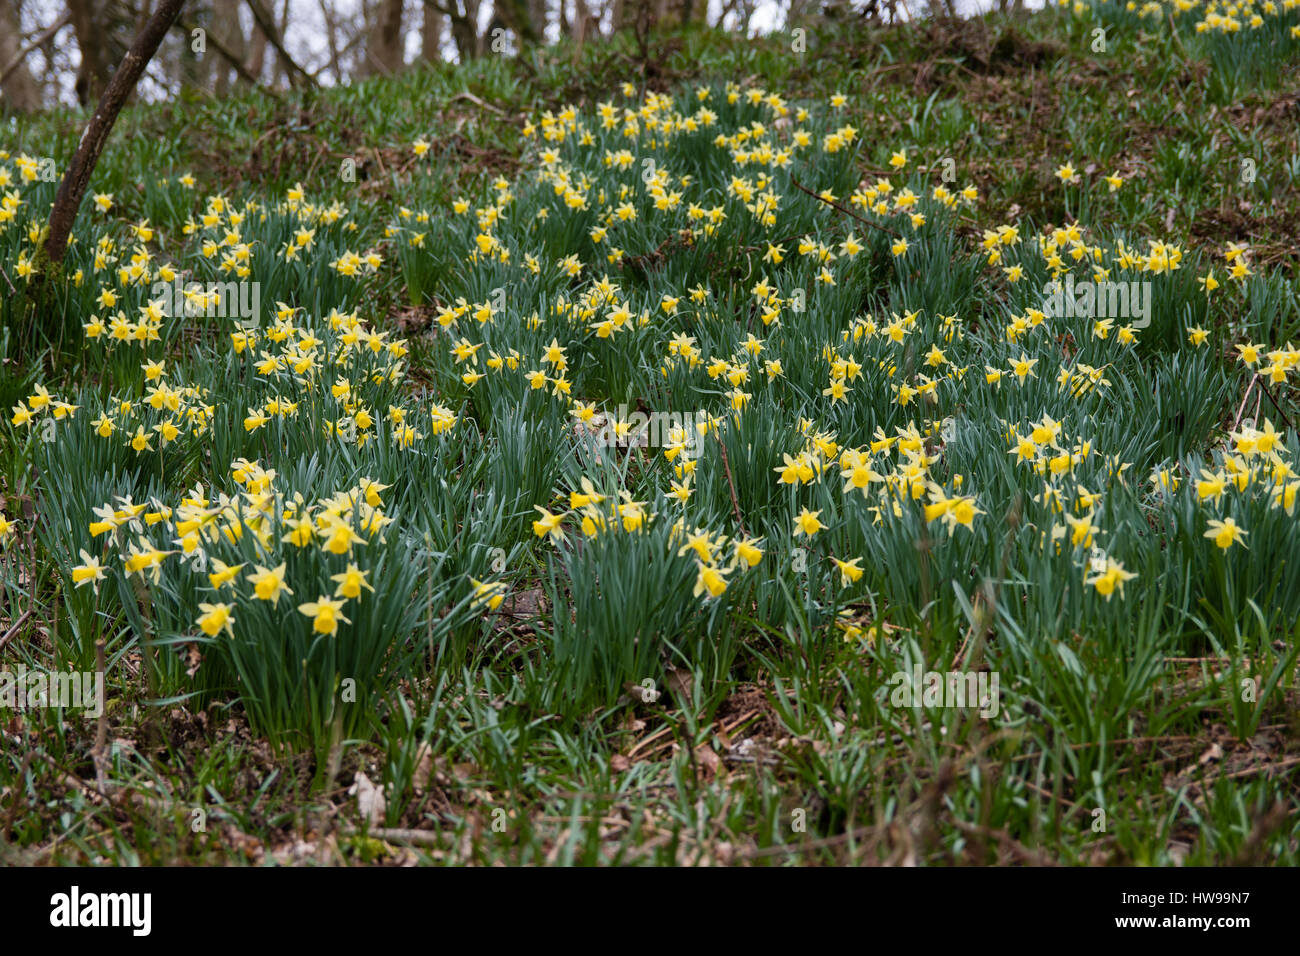 Mass of wild daffodils (Narcissus pseudonarcissus pseudonarcissus). Native daffodil, aka lent lily, in flower in Oyster's Coppice woodland, UK Stock Photo